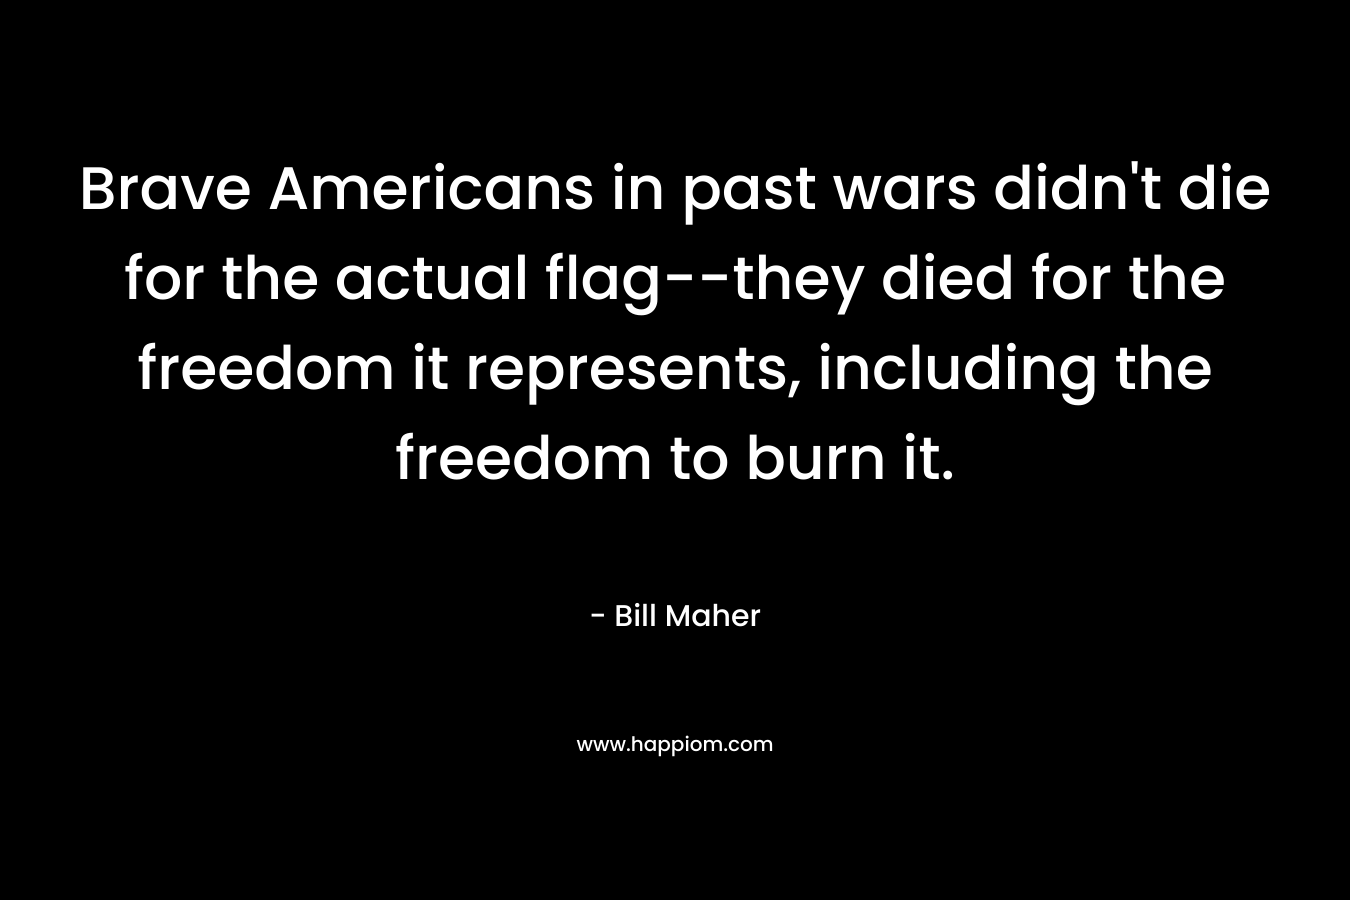 Brave Americans in past wars didn’t die for the actual flag–they died for the freedom it represents, including the freedom to burn it. – Bill Maher